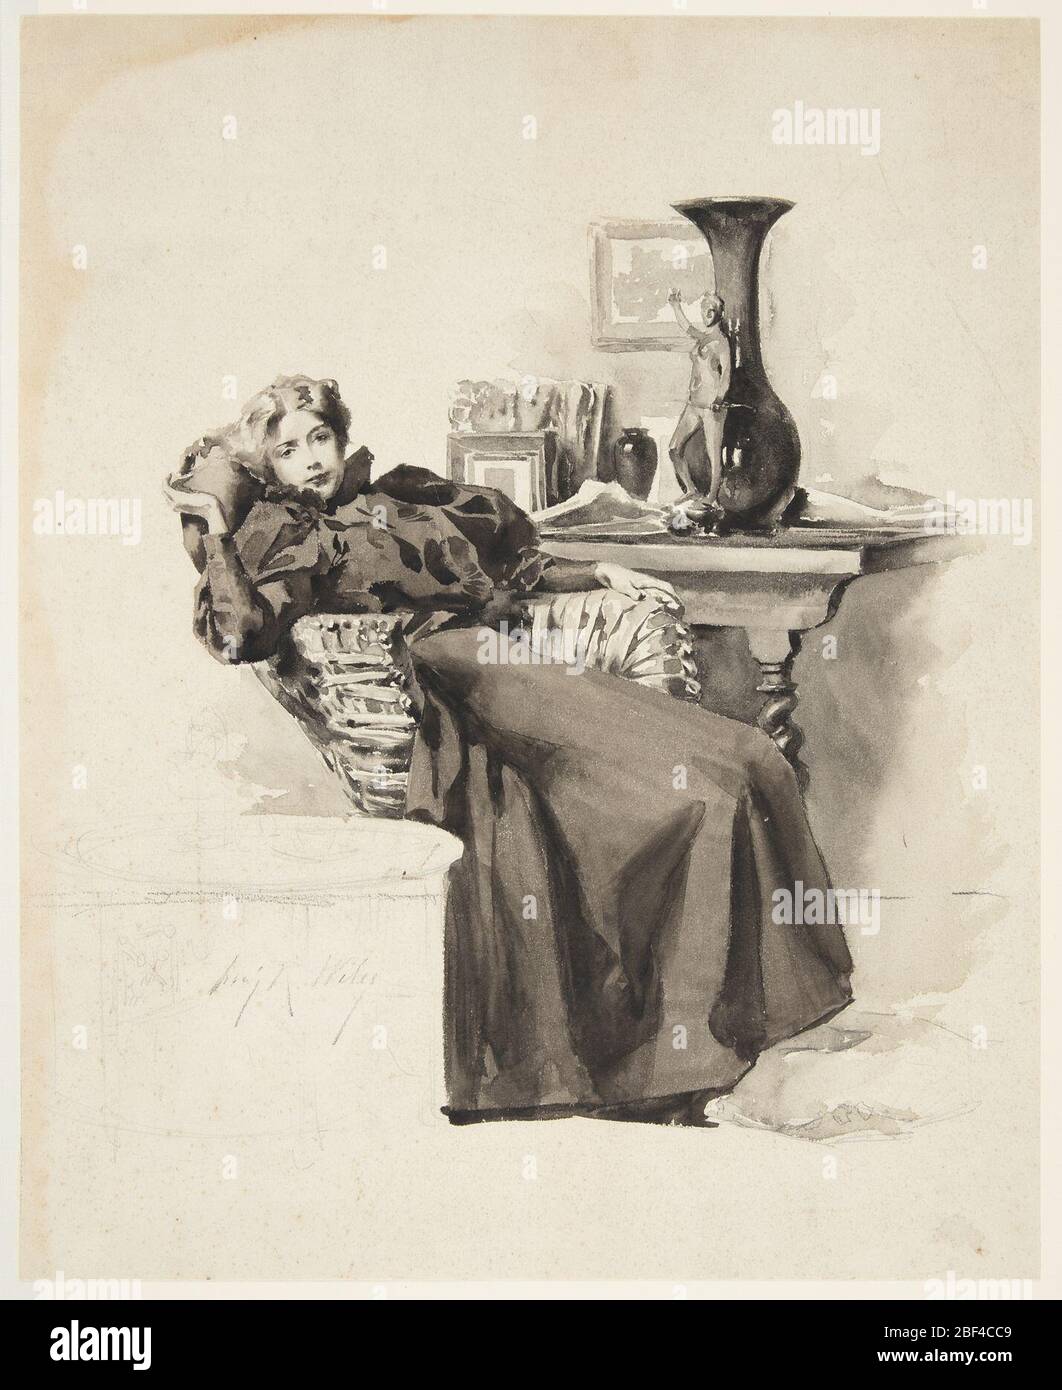 Girl in a Wicker Chair. A woman, dressed in clothing from the 1890s, reclines in a wicker chair, a table with still life behind her. Another table with a tea pot and cup is lightly sketched in graphite, lower left. Stock Photo